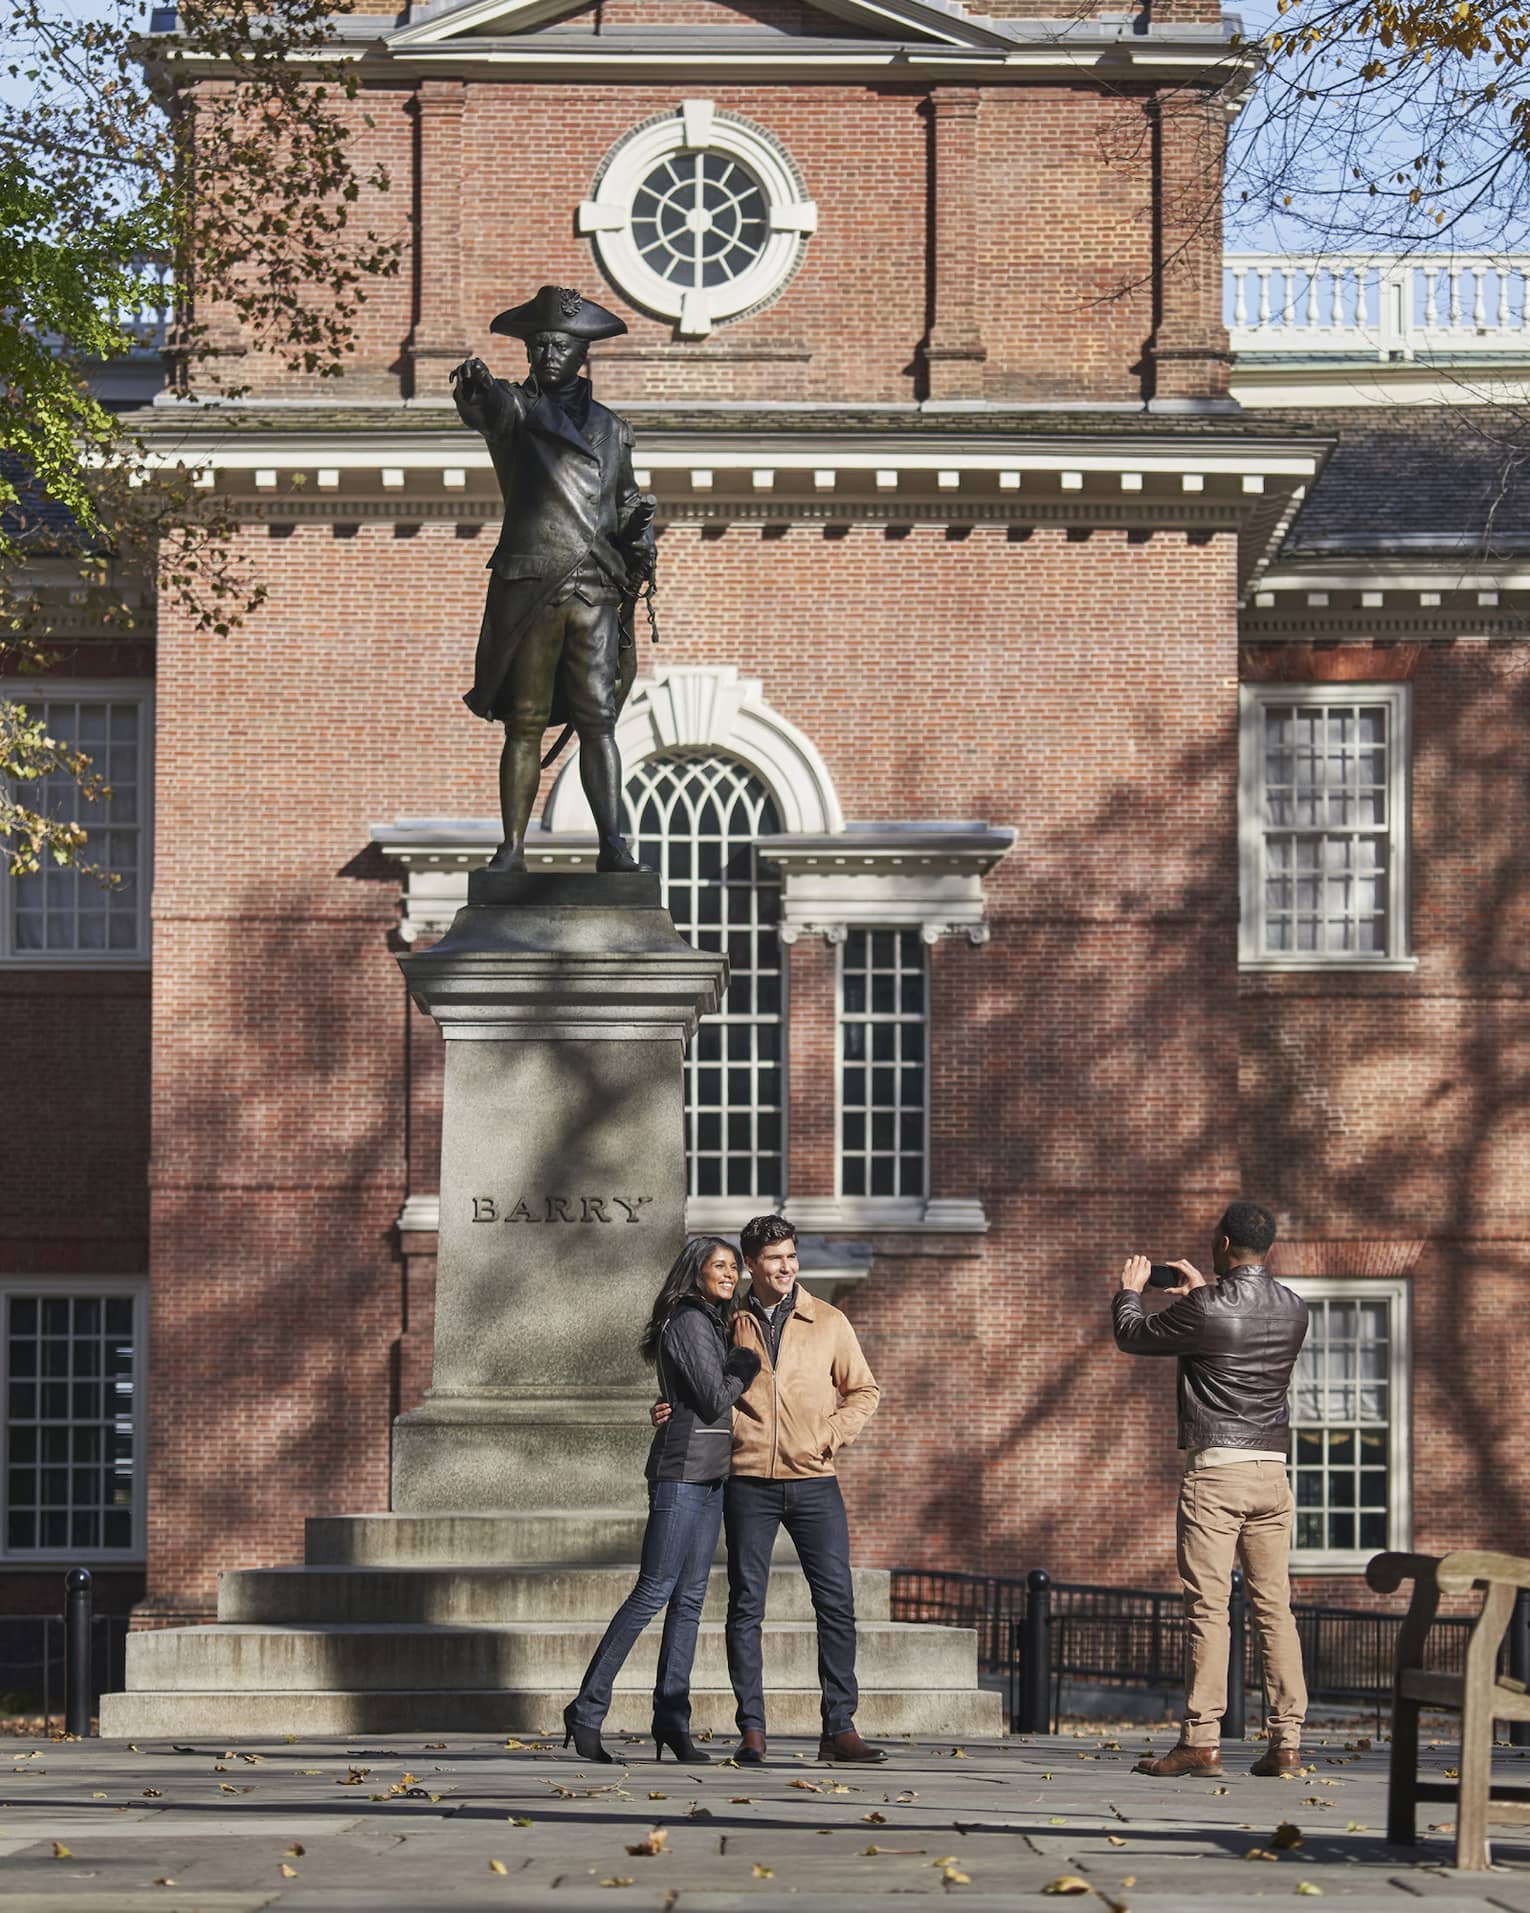 Couple poses for photo in front of statue and historic building